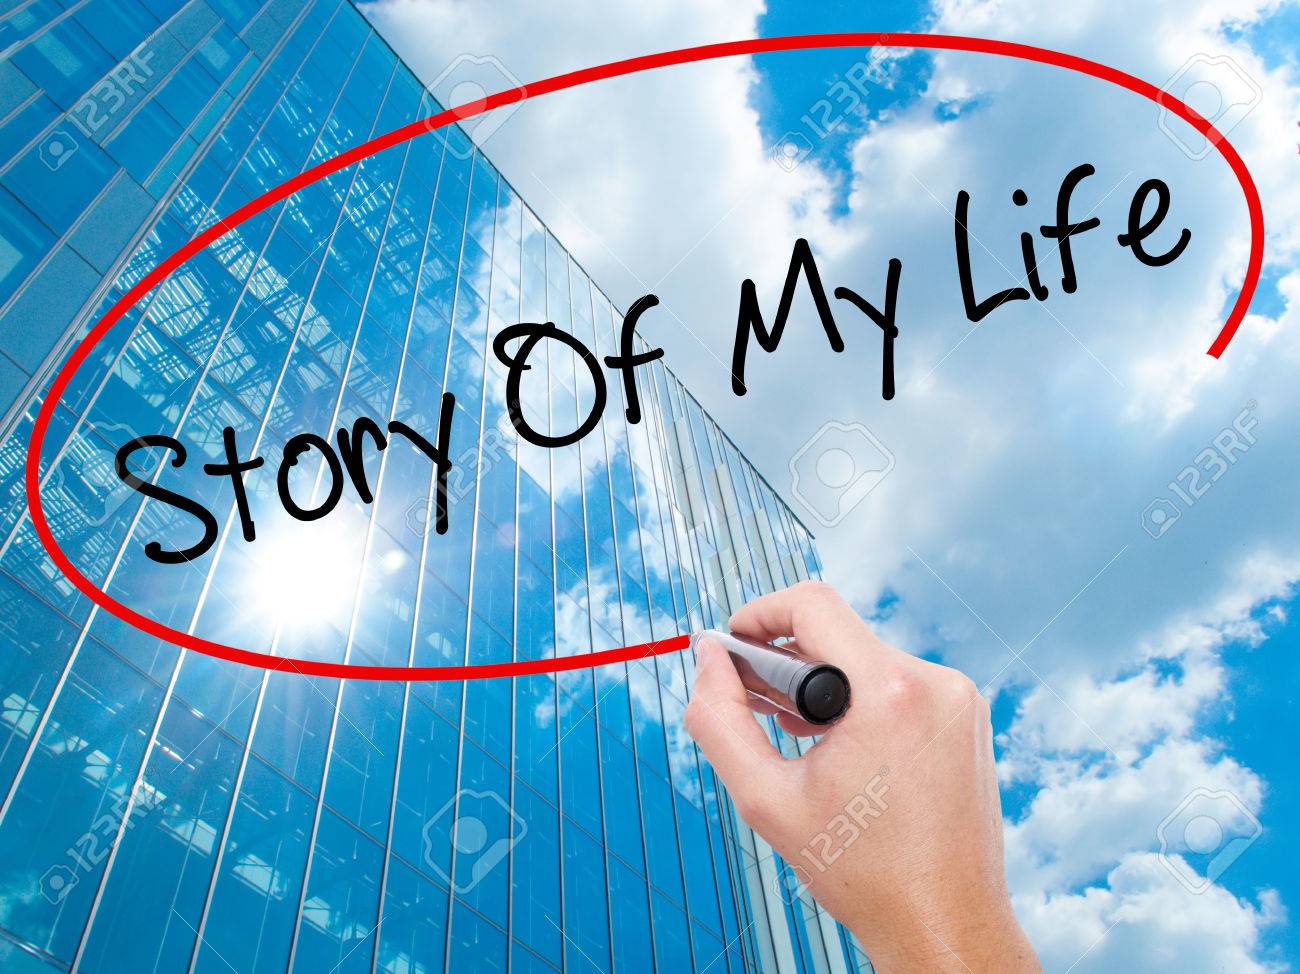 How To Start Writing My Life Story